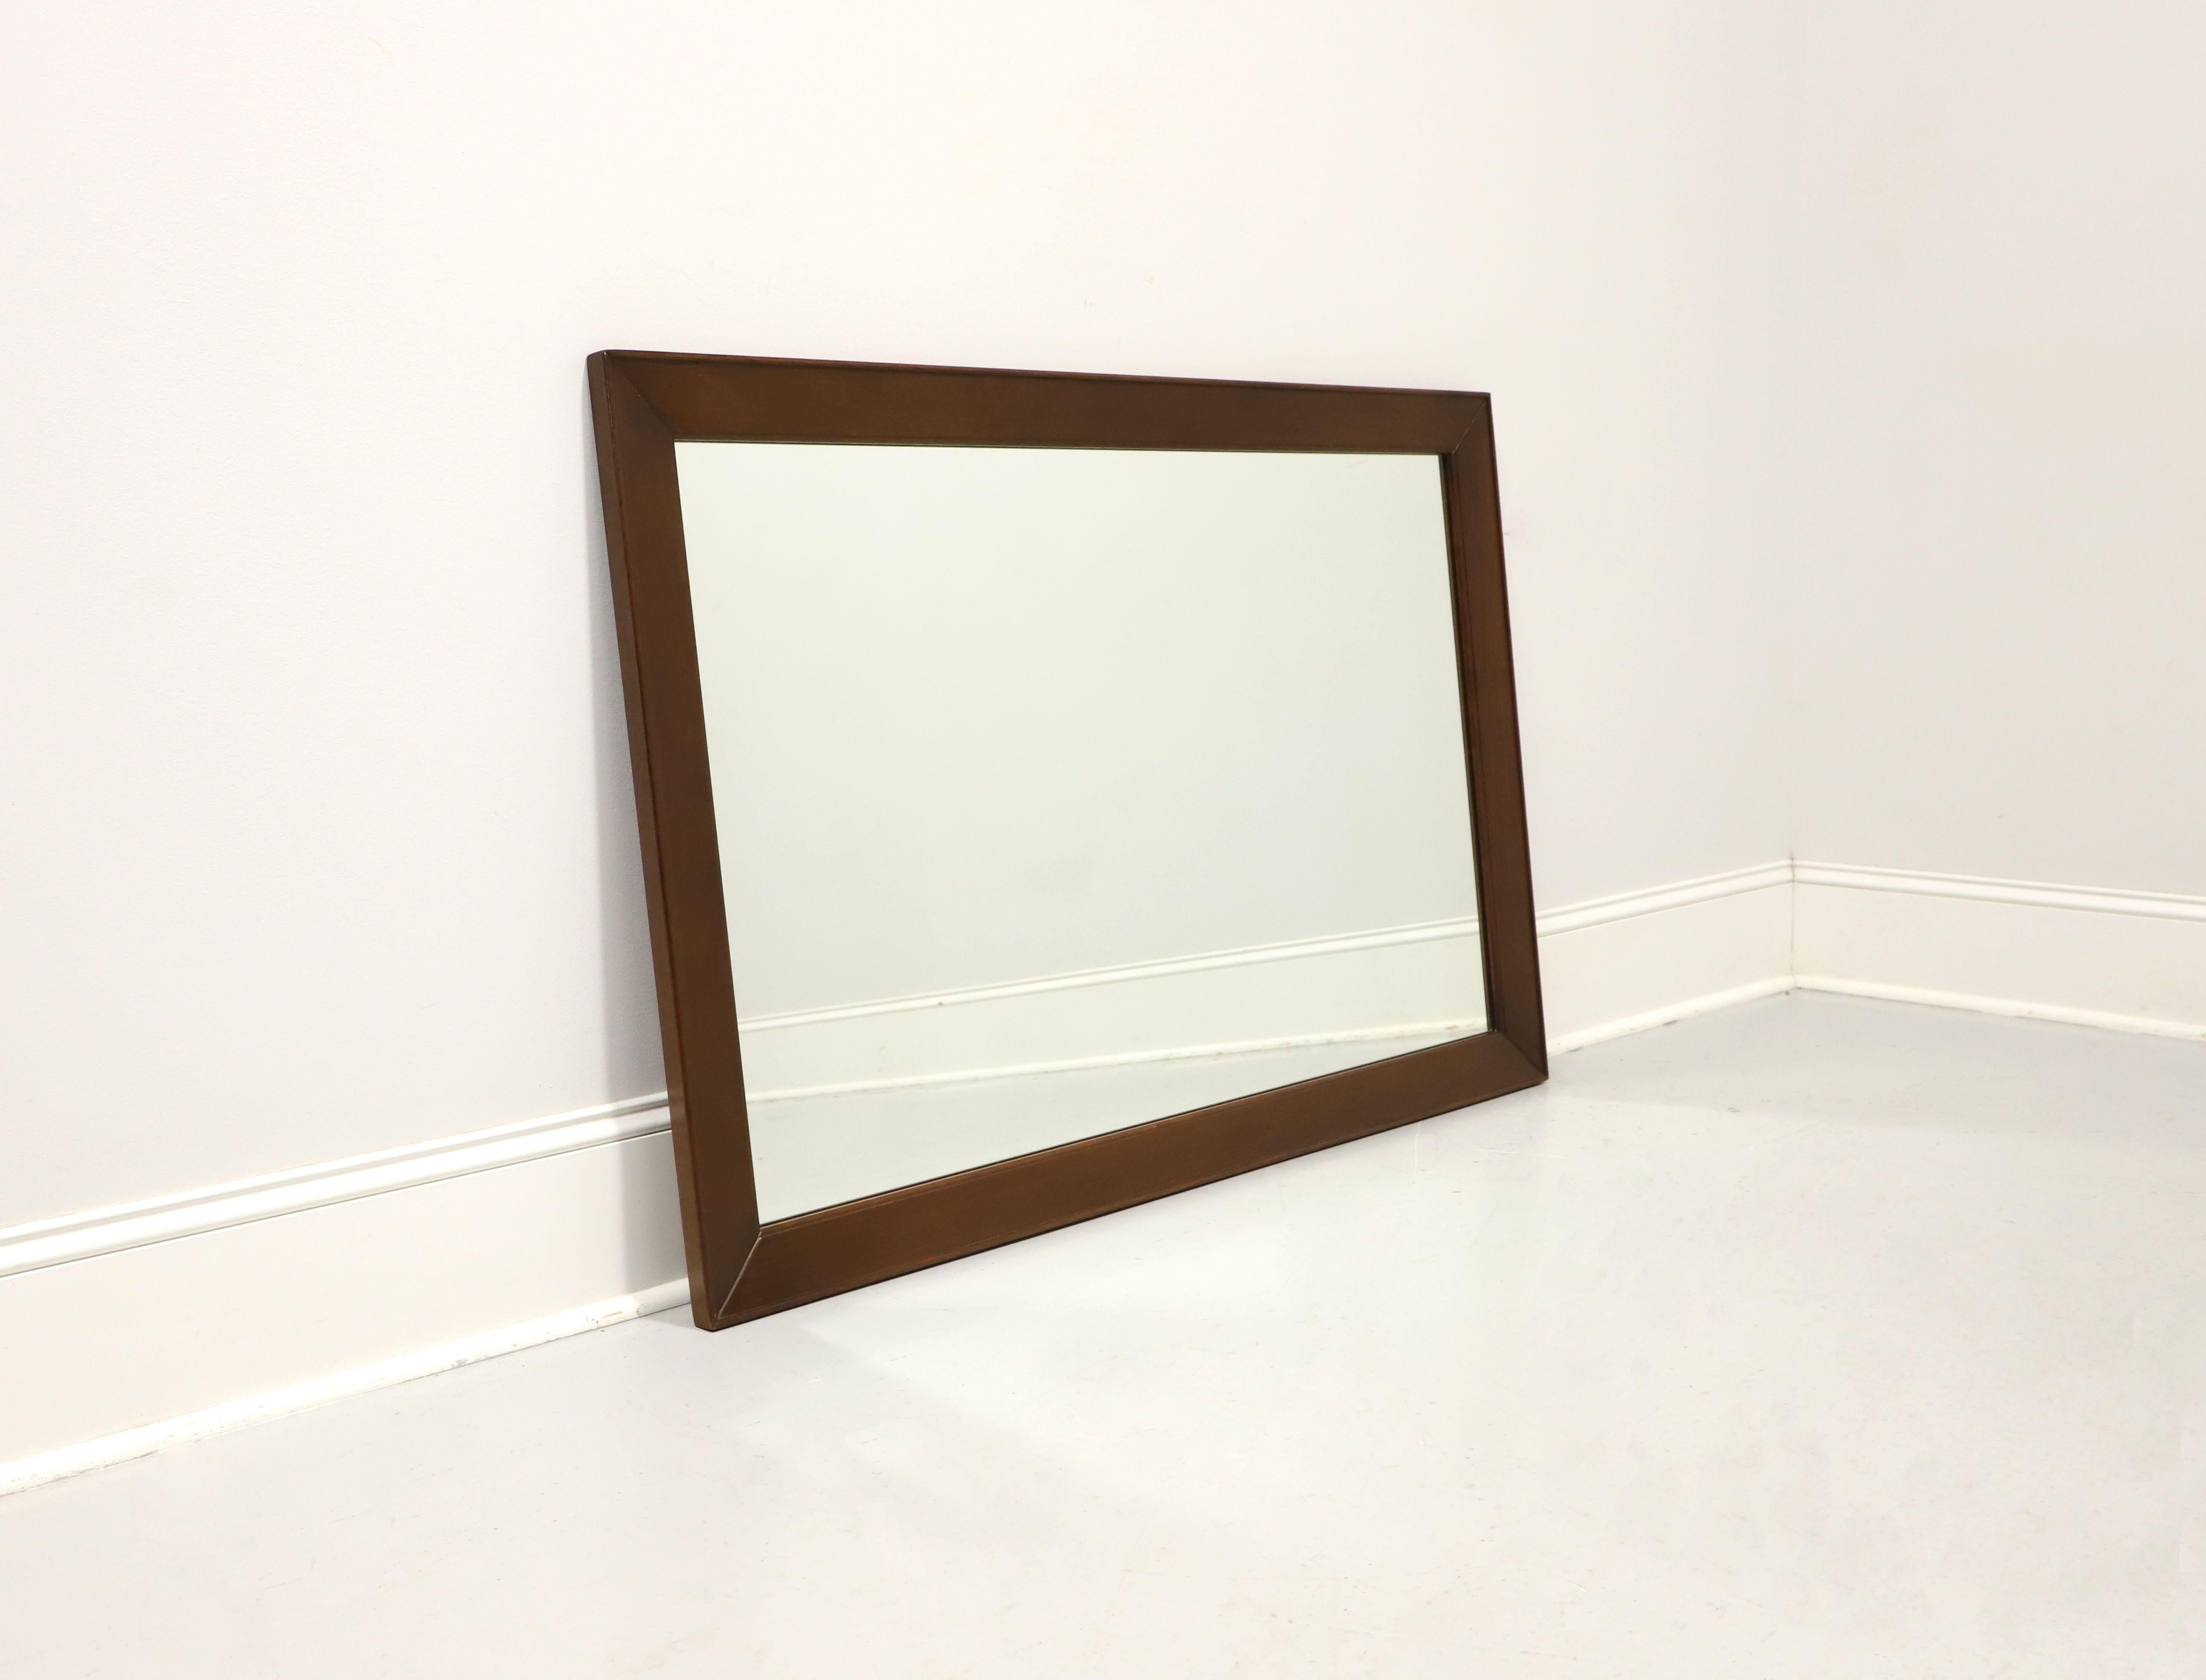 A Traditional style rectangular dresser or wall mirror by high-quality furniture maker Craftique. Mirror glass in a solid mahogany frame with a smooth eased edge and their Old Wood finish. Made in Mebane, North Carolina, USA, in the late 20th